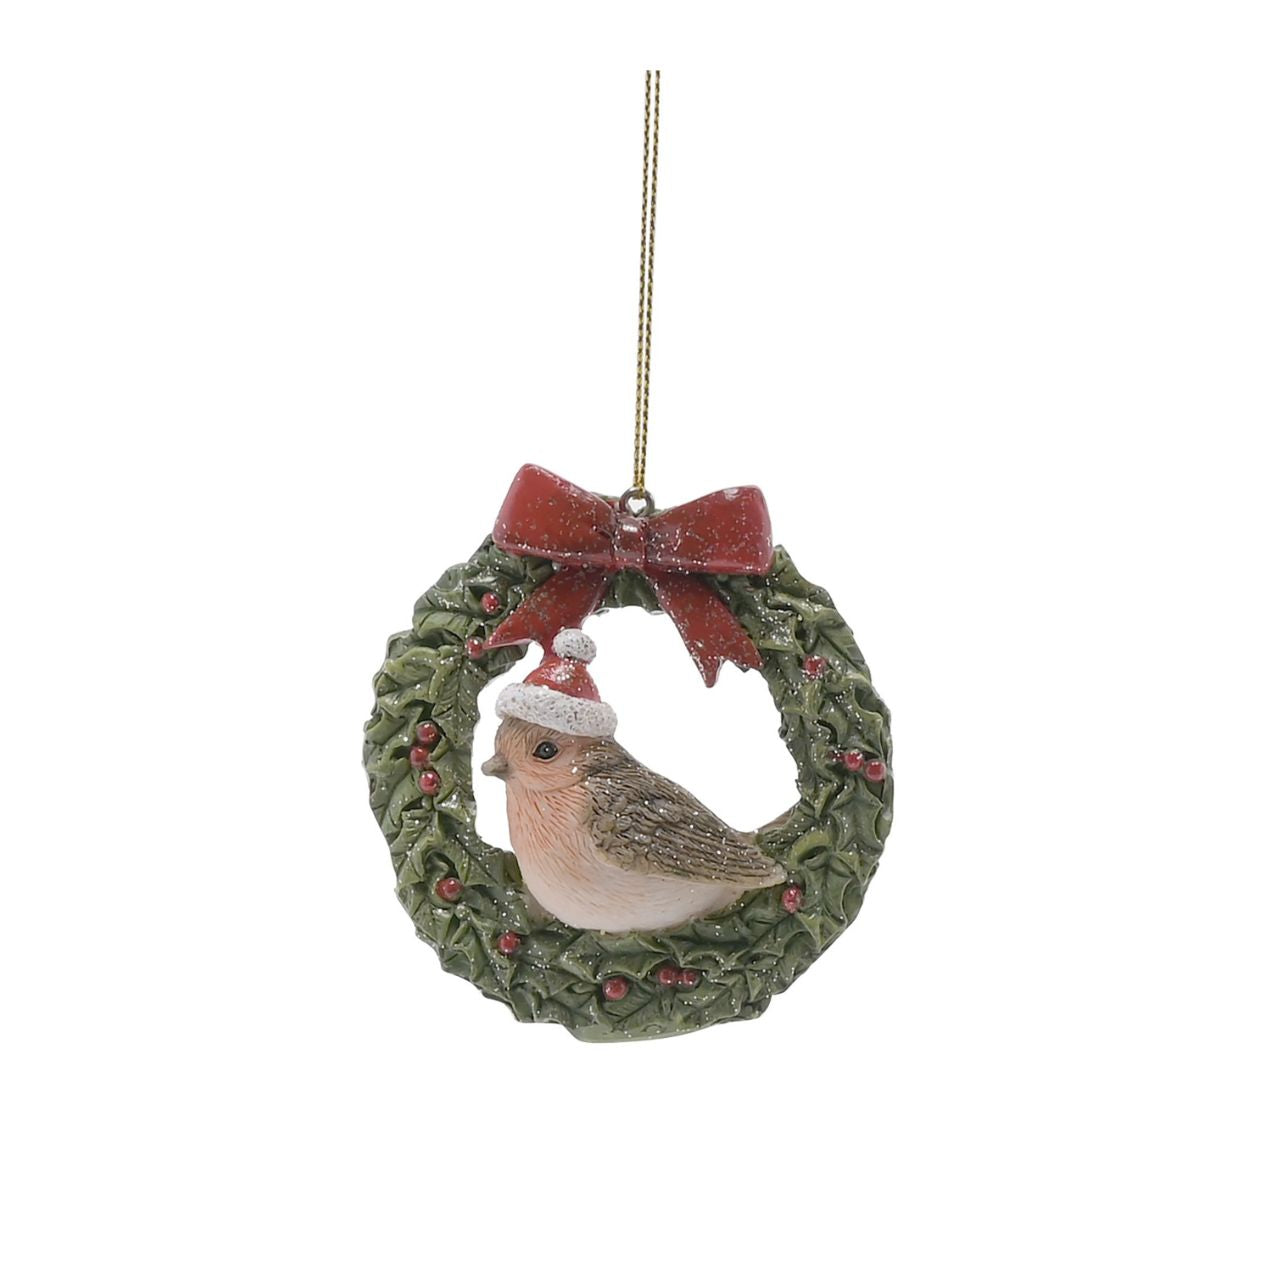 Robin Wreath Christmas Hanging Decoration  A Robin in wreath Christmas decoration.  This standout decoration takes centre stage when displayed on the Christmas tree.